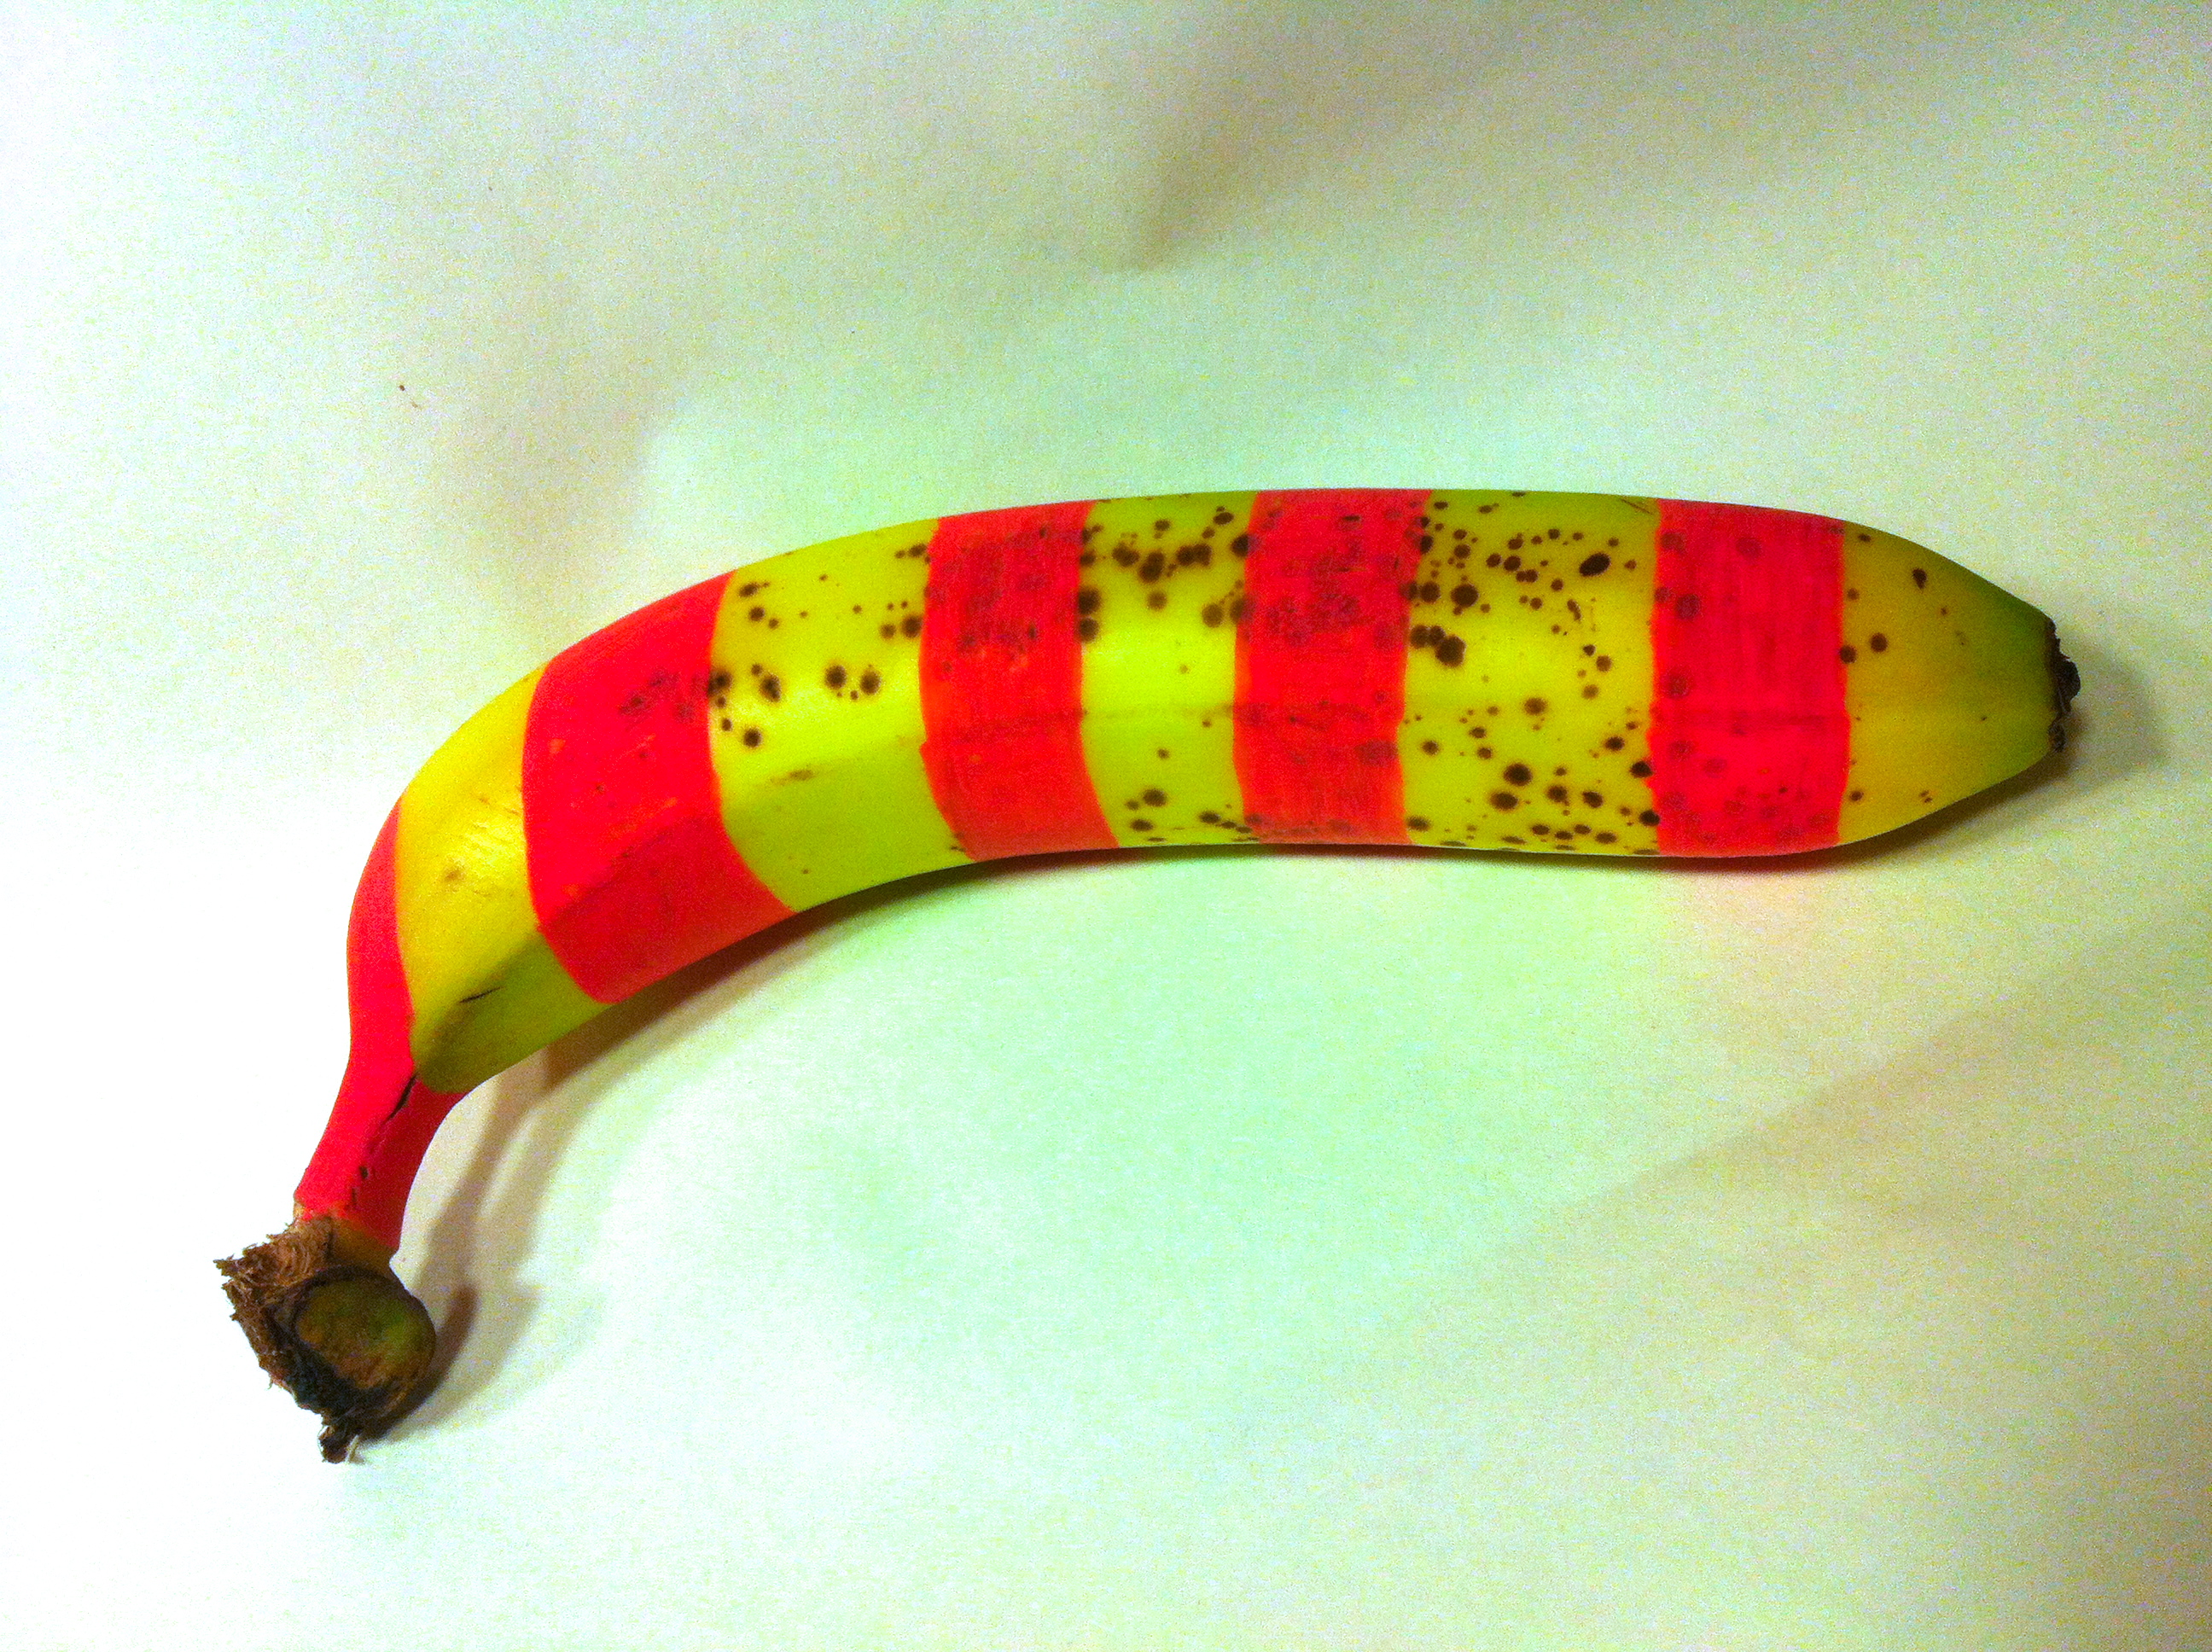 Painted banana with red stripes.